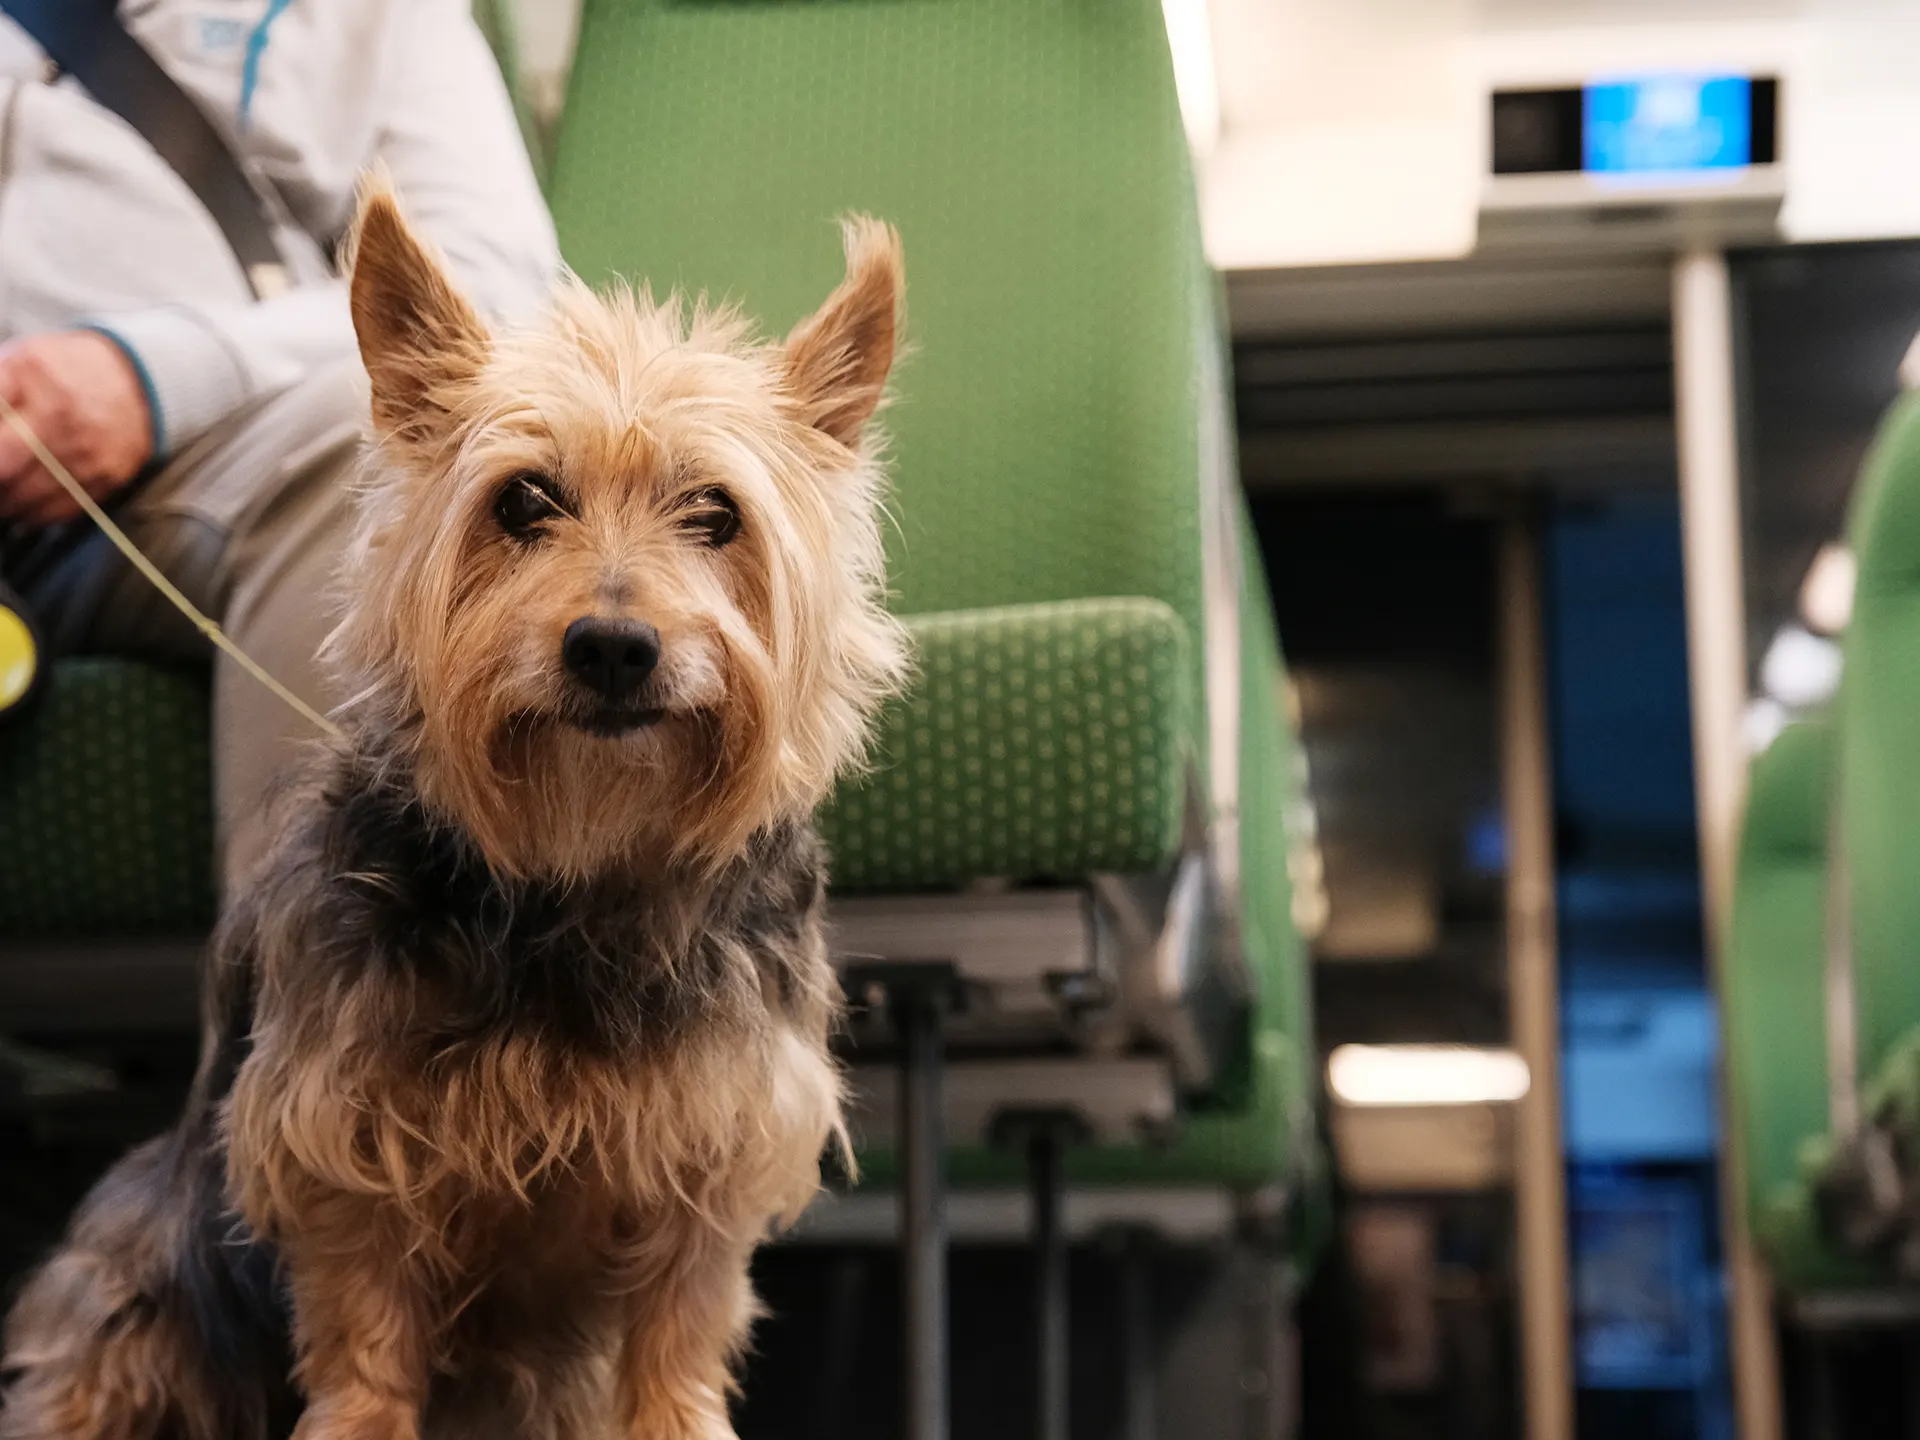 The commuter train is also suitable for pets.